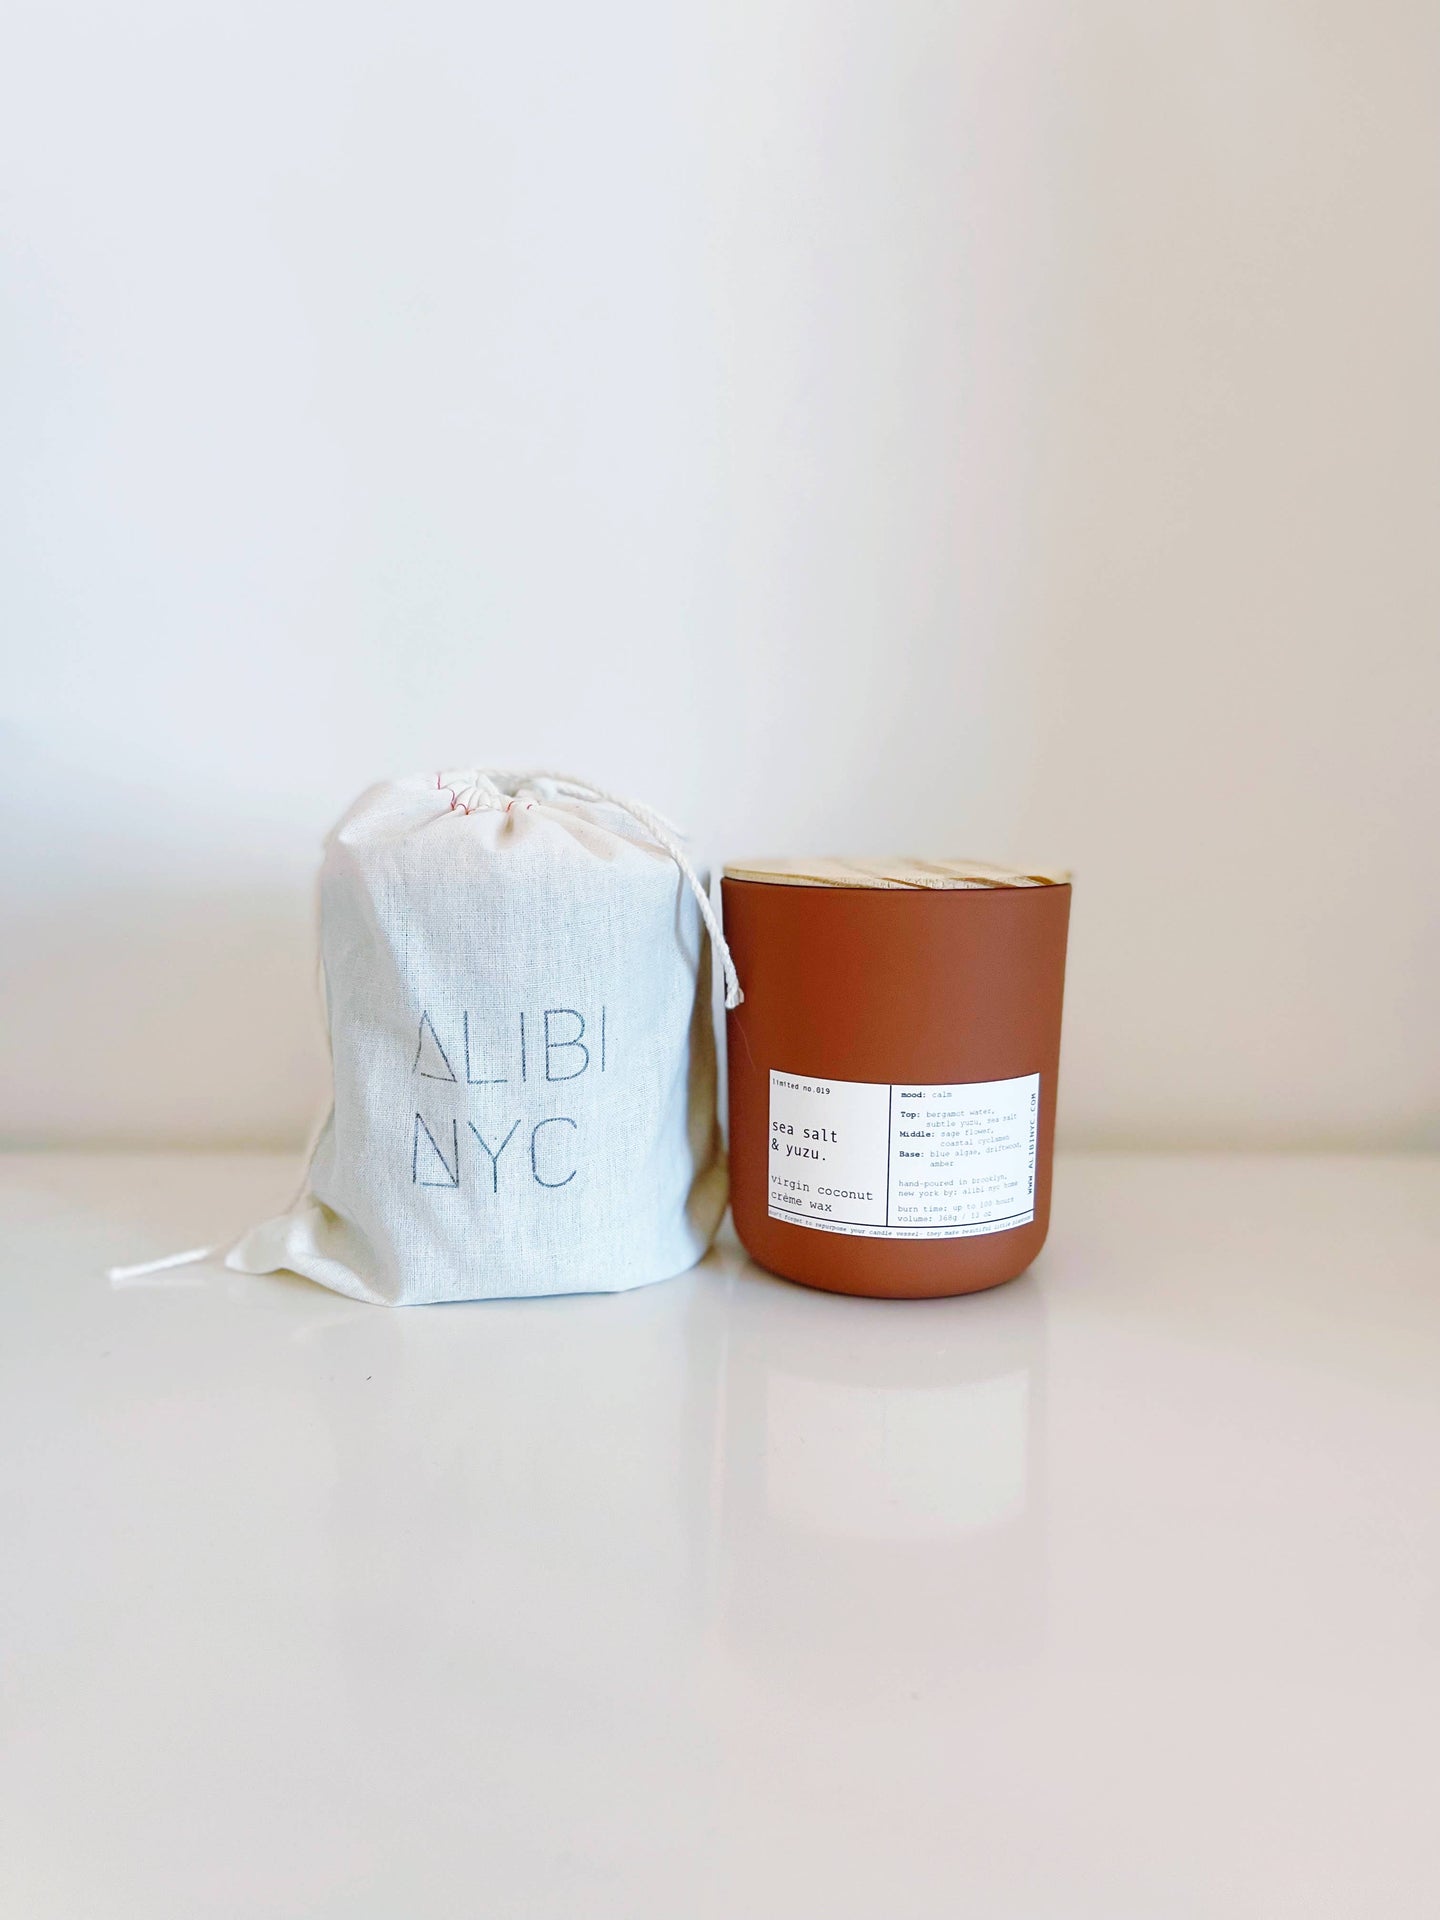 ALIBI NYC - AFTER PARTY | VIRGIN COCONUT CRÈME & WOODEN WICK CANDLE